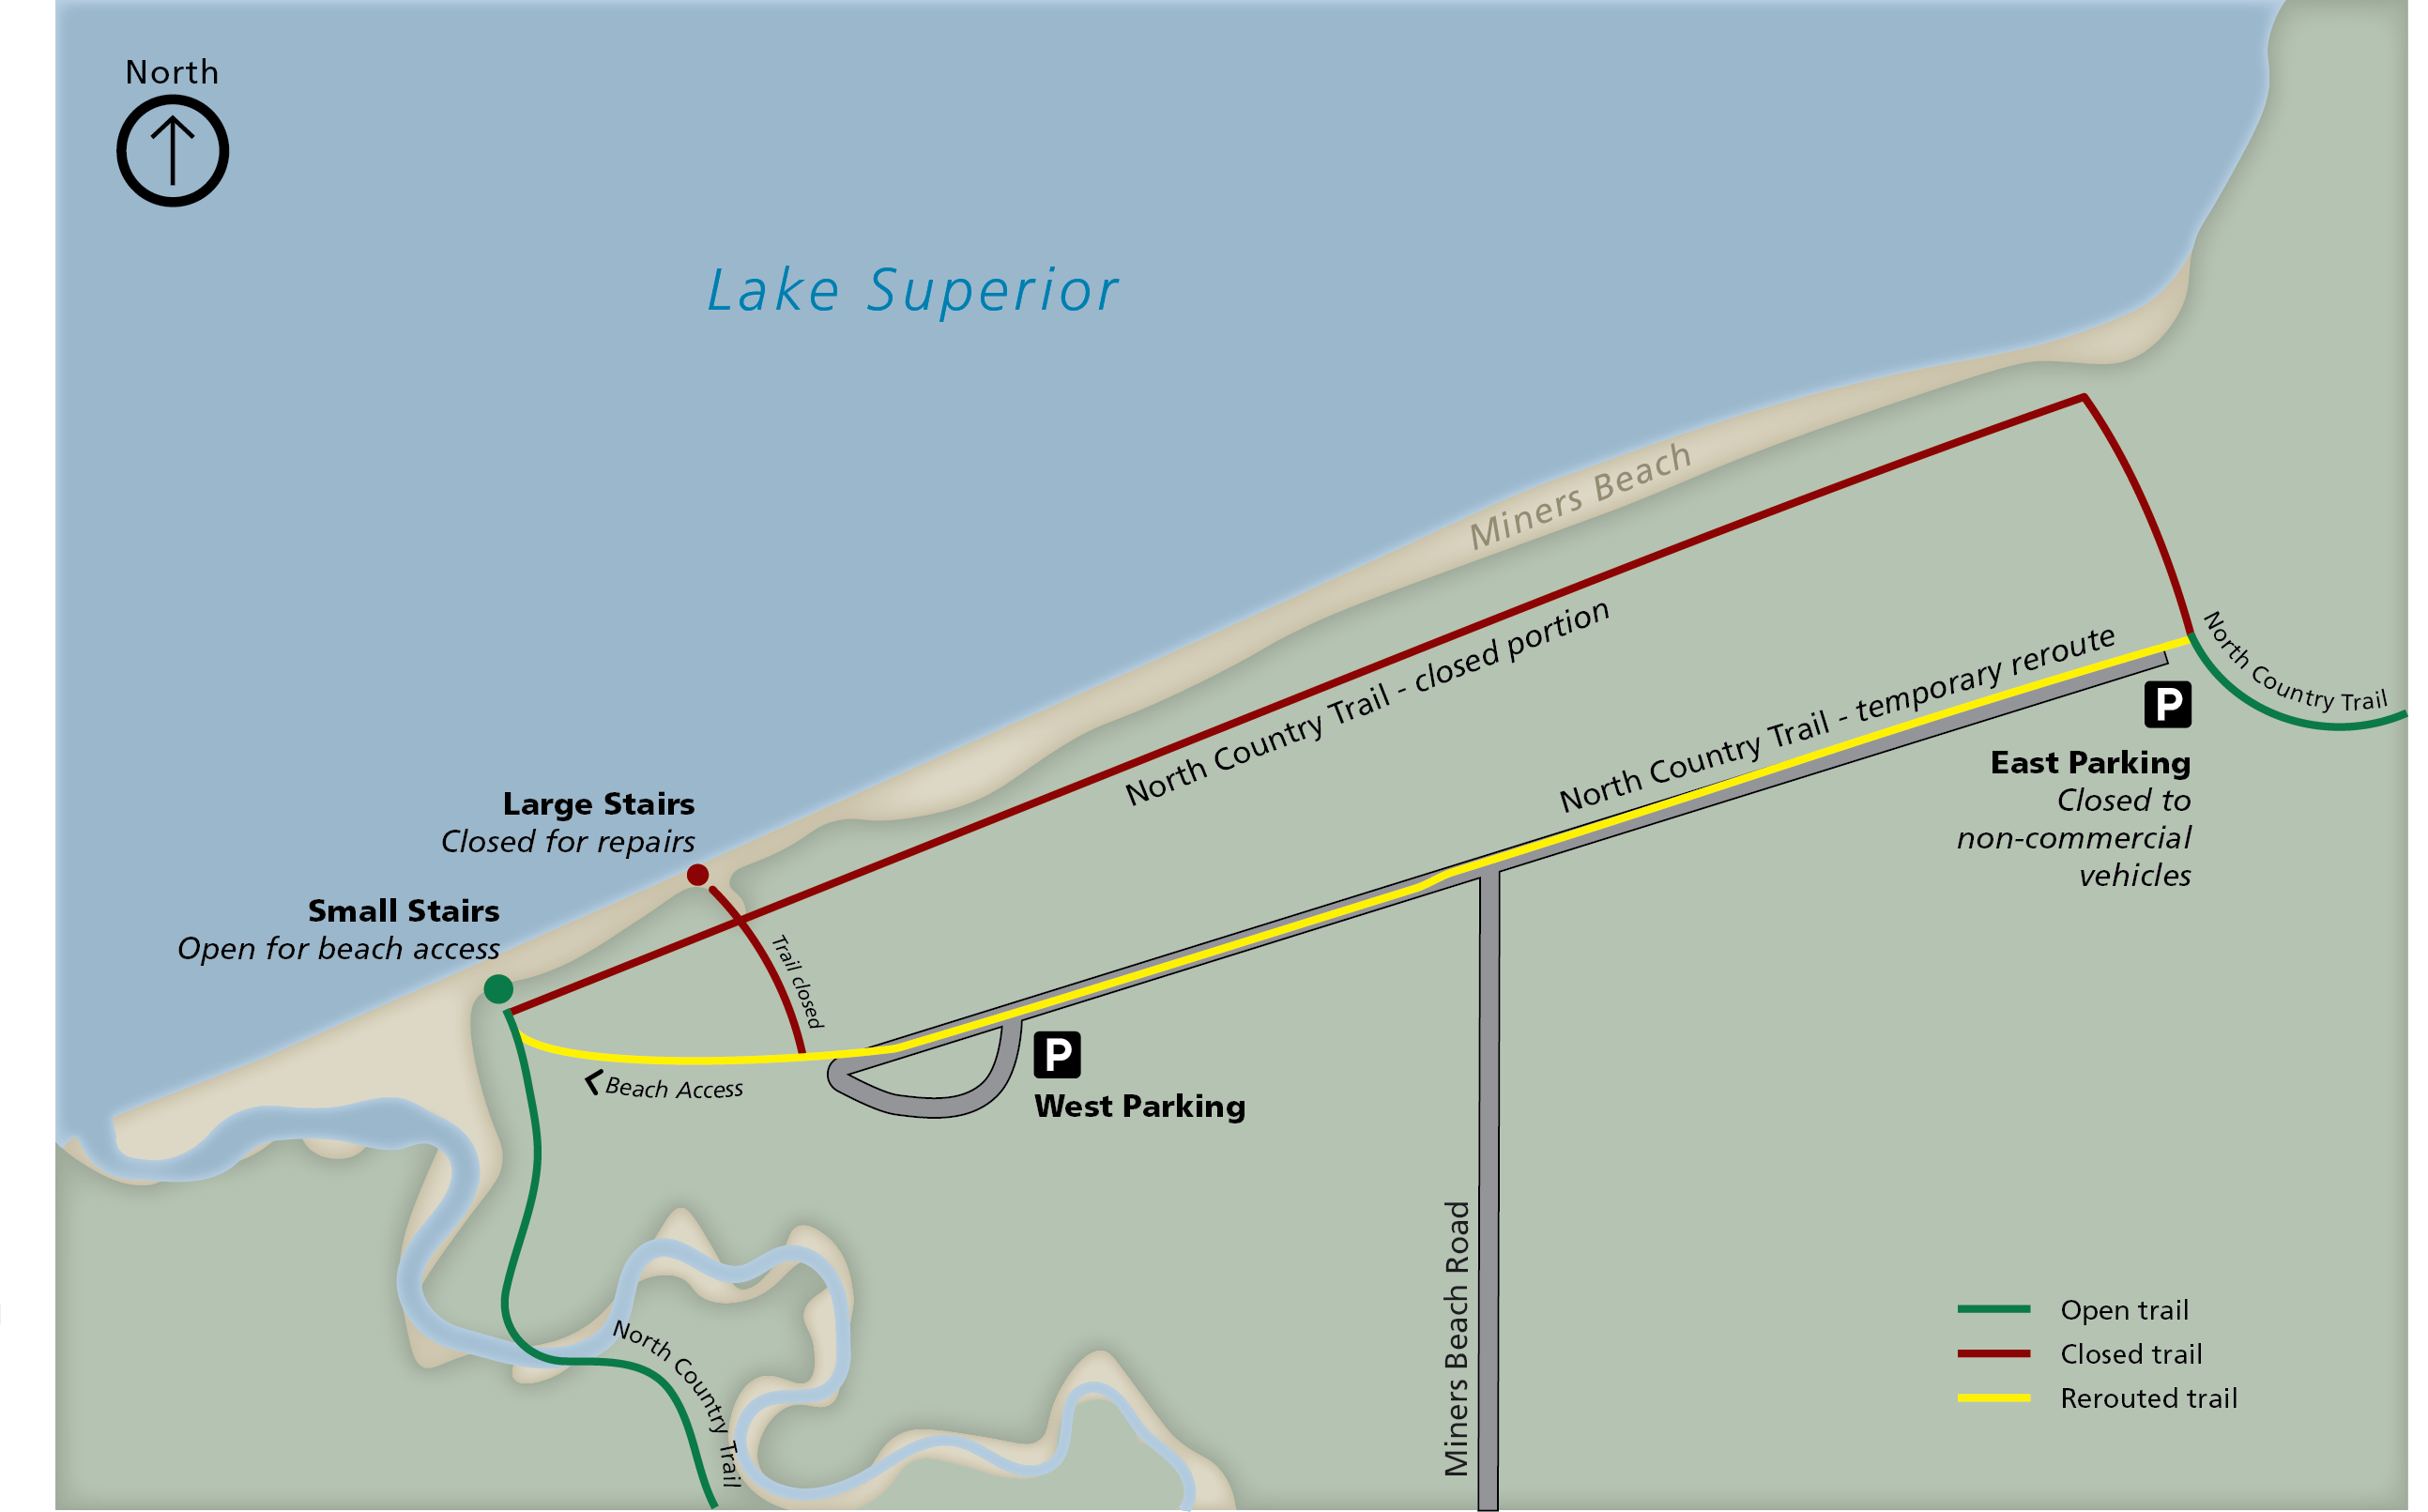 A map showing closure area of Miners Beach. The North Country Trail is closed for about a mile along the beach, it is rerouted through the parking area. The large stairs are closed, but there is a smaller set of stairs just southwest of the closed stairs.